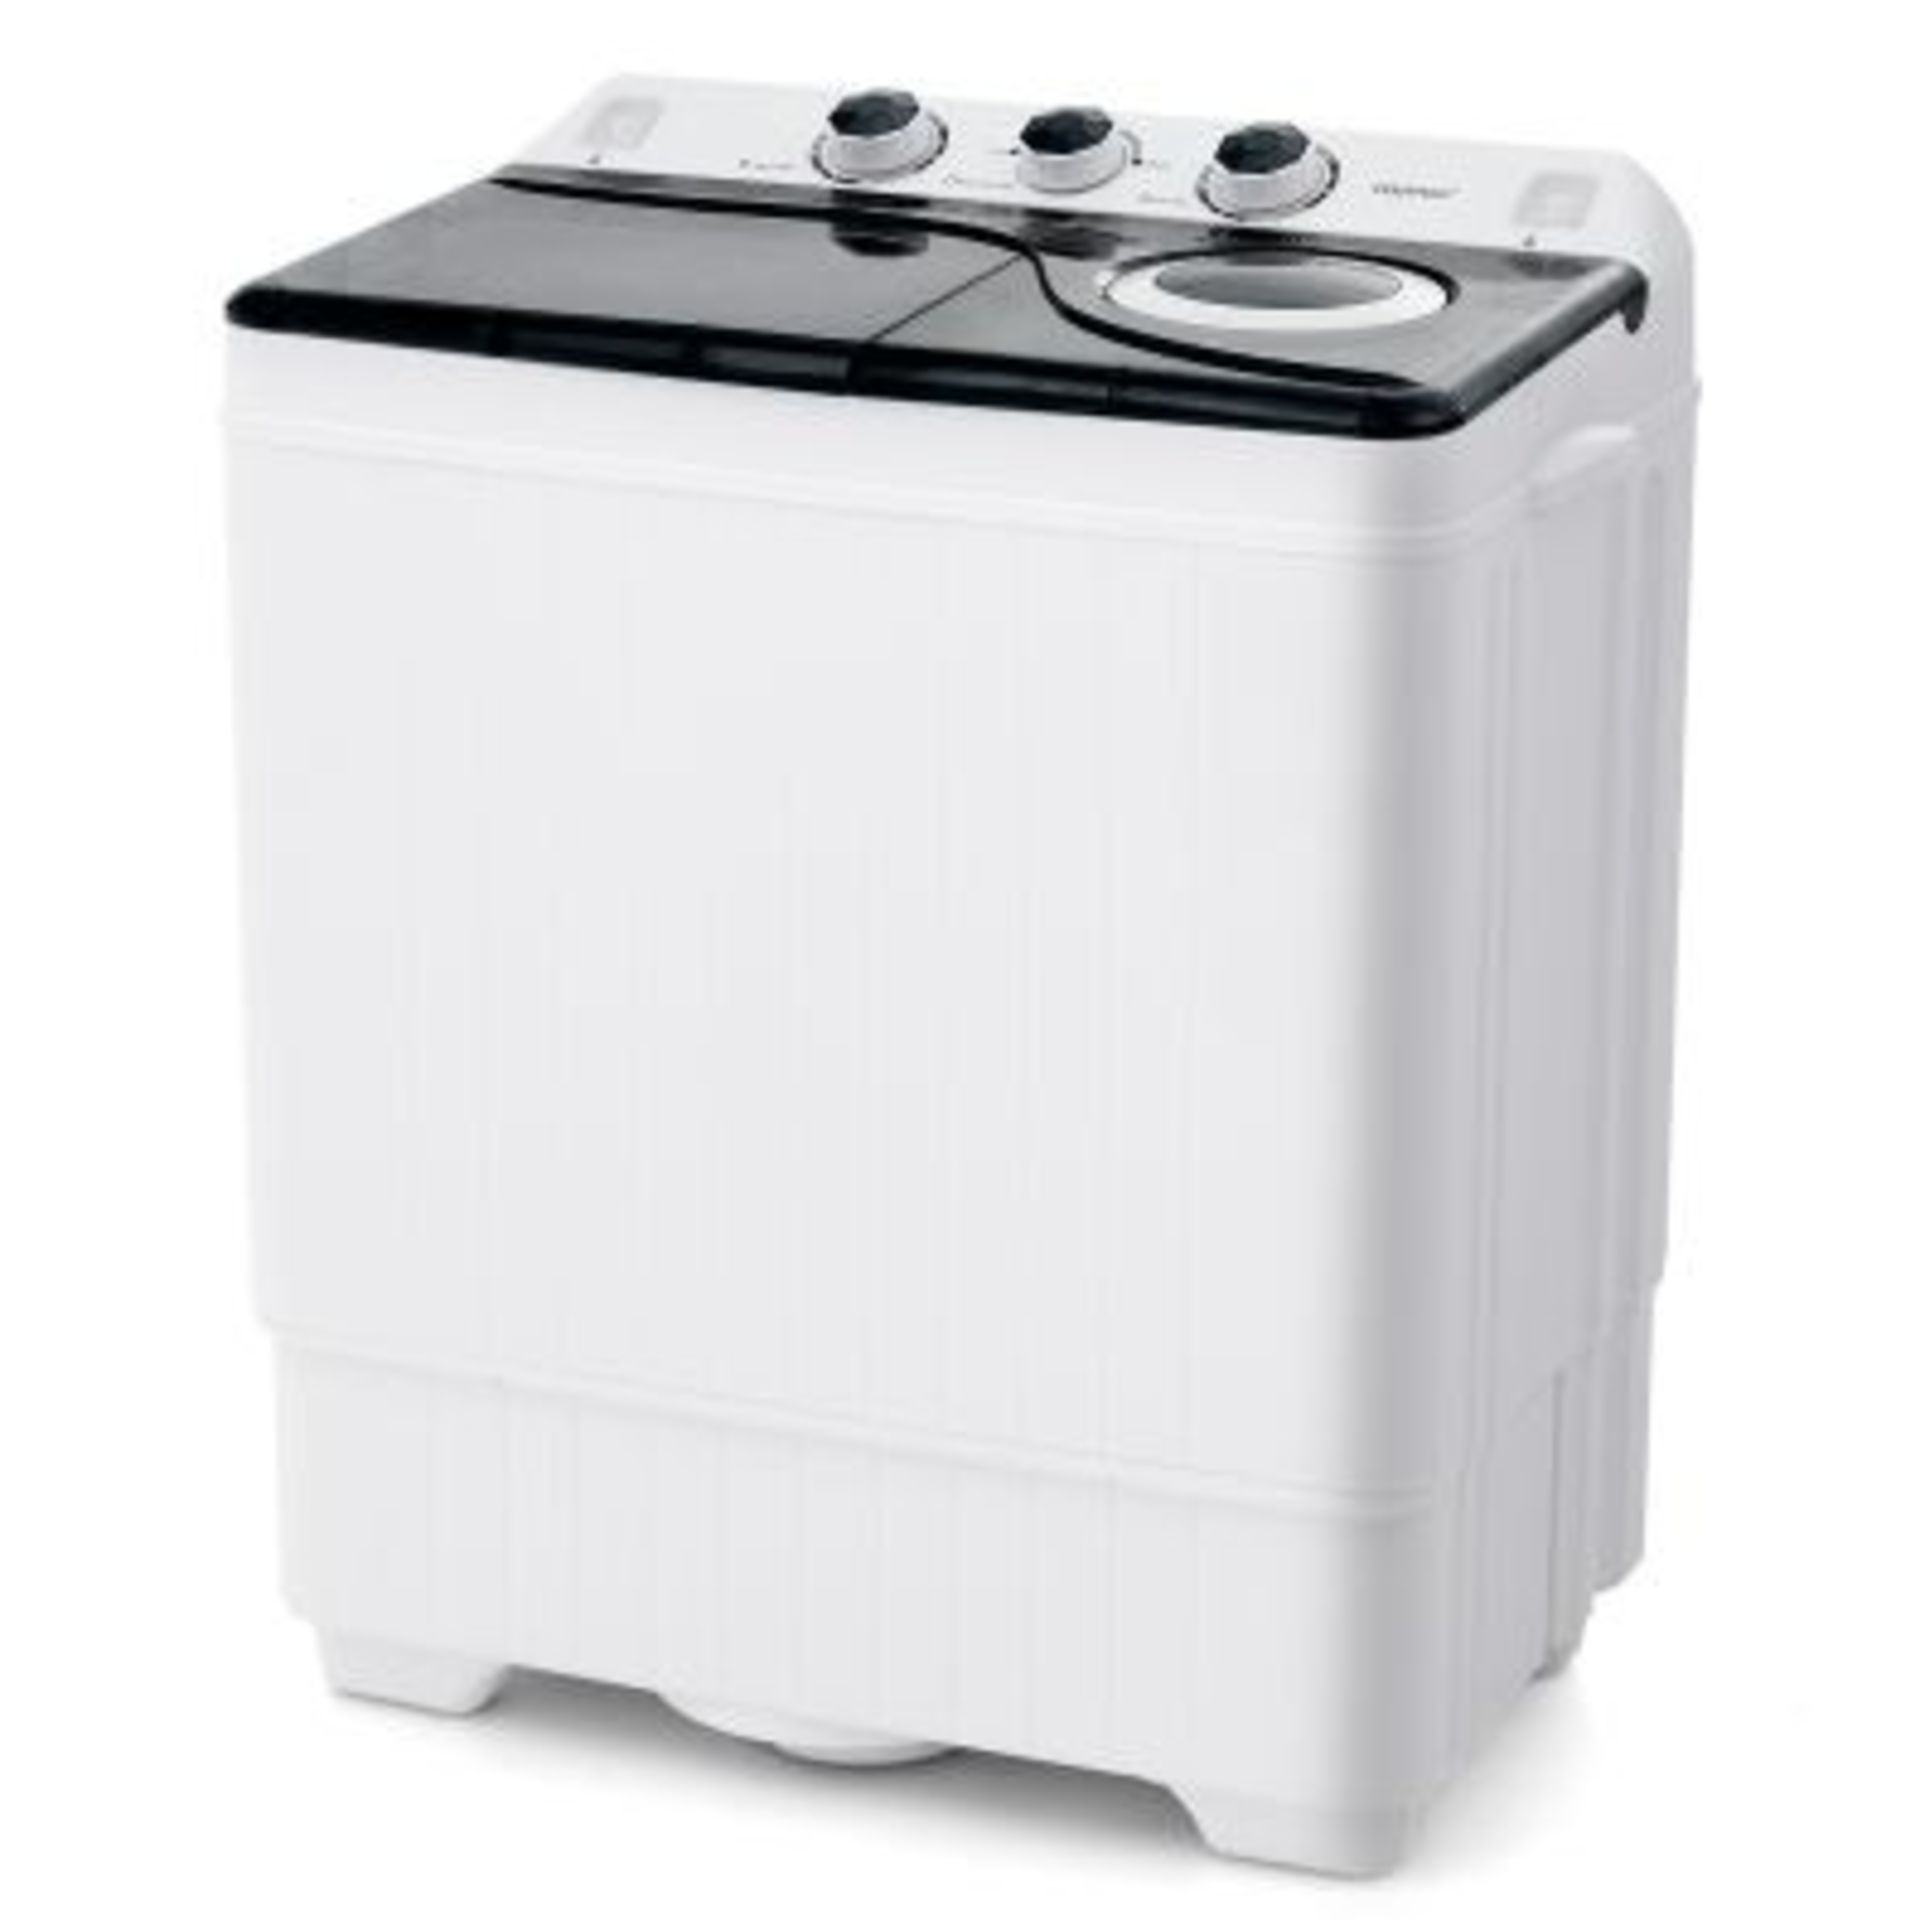 Portable Laundry Washer with Timing Function and Drain Pump - ER24